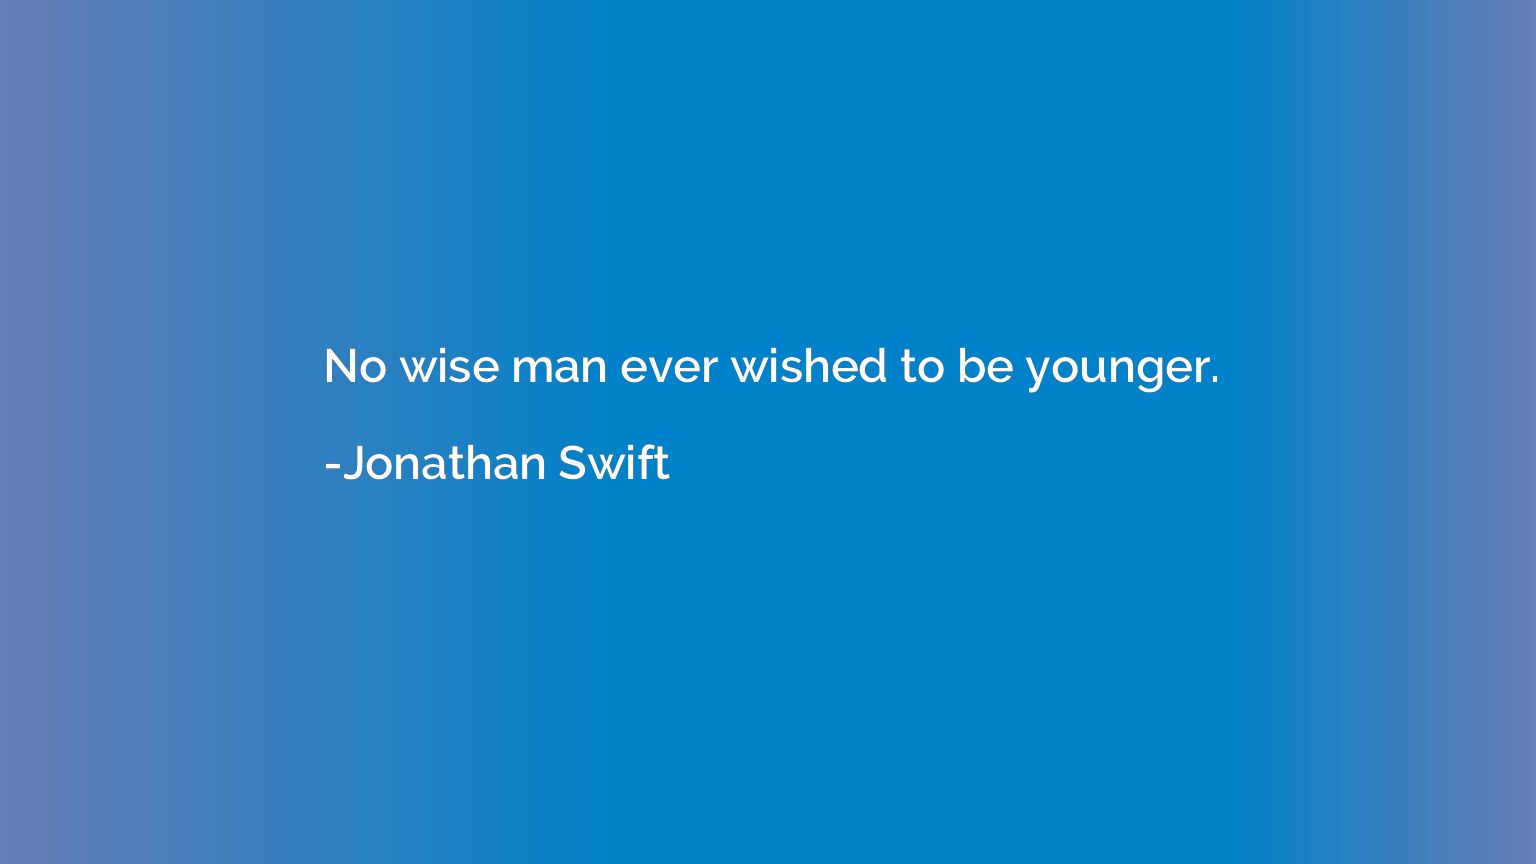 No wise man ever wished to be younger.